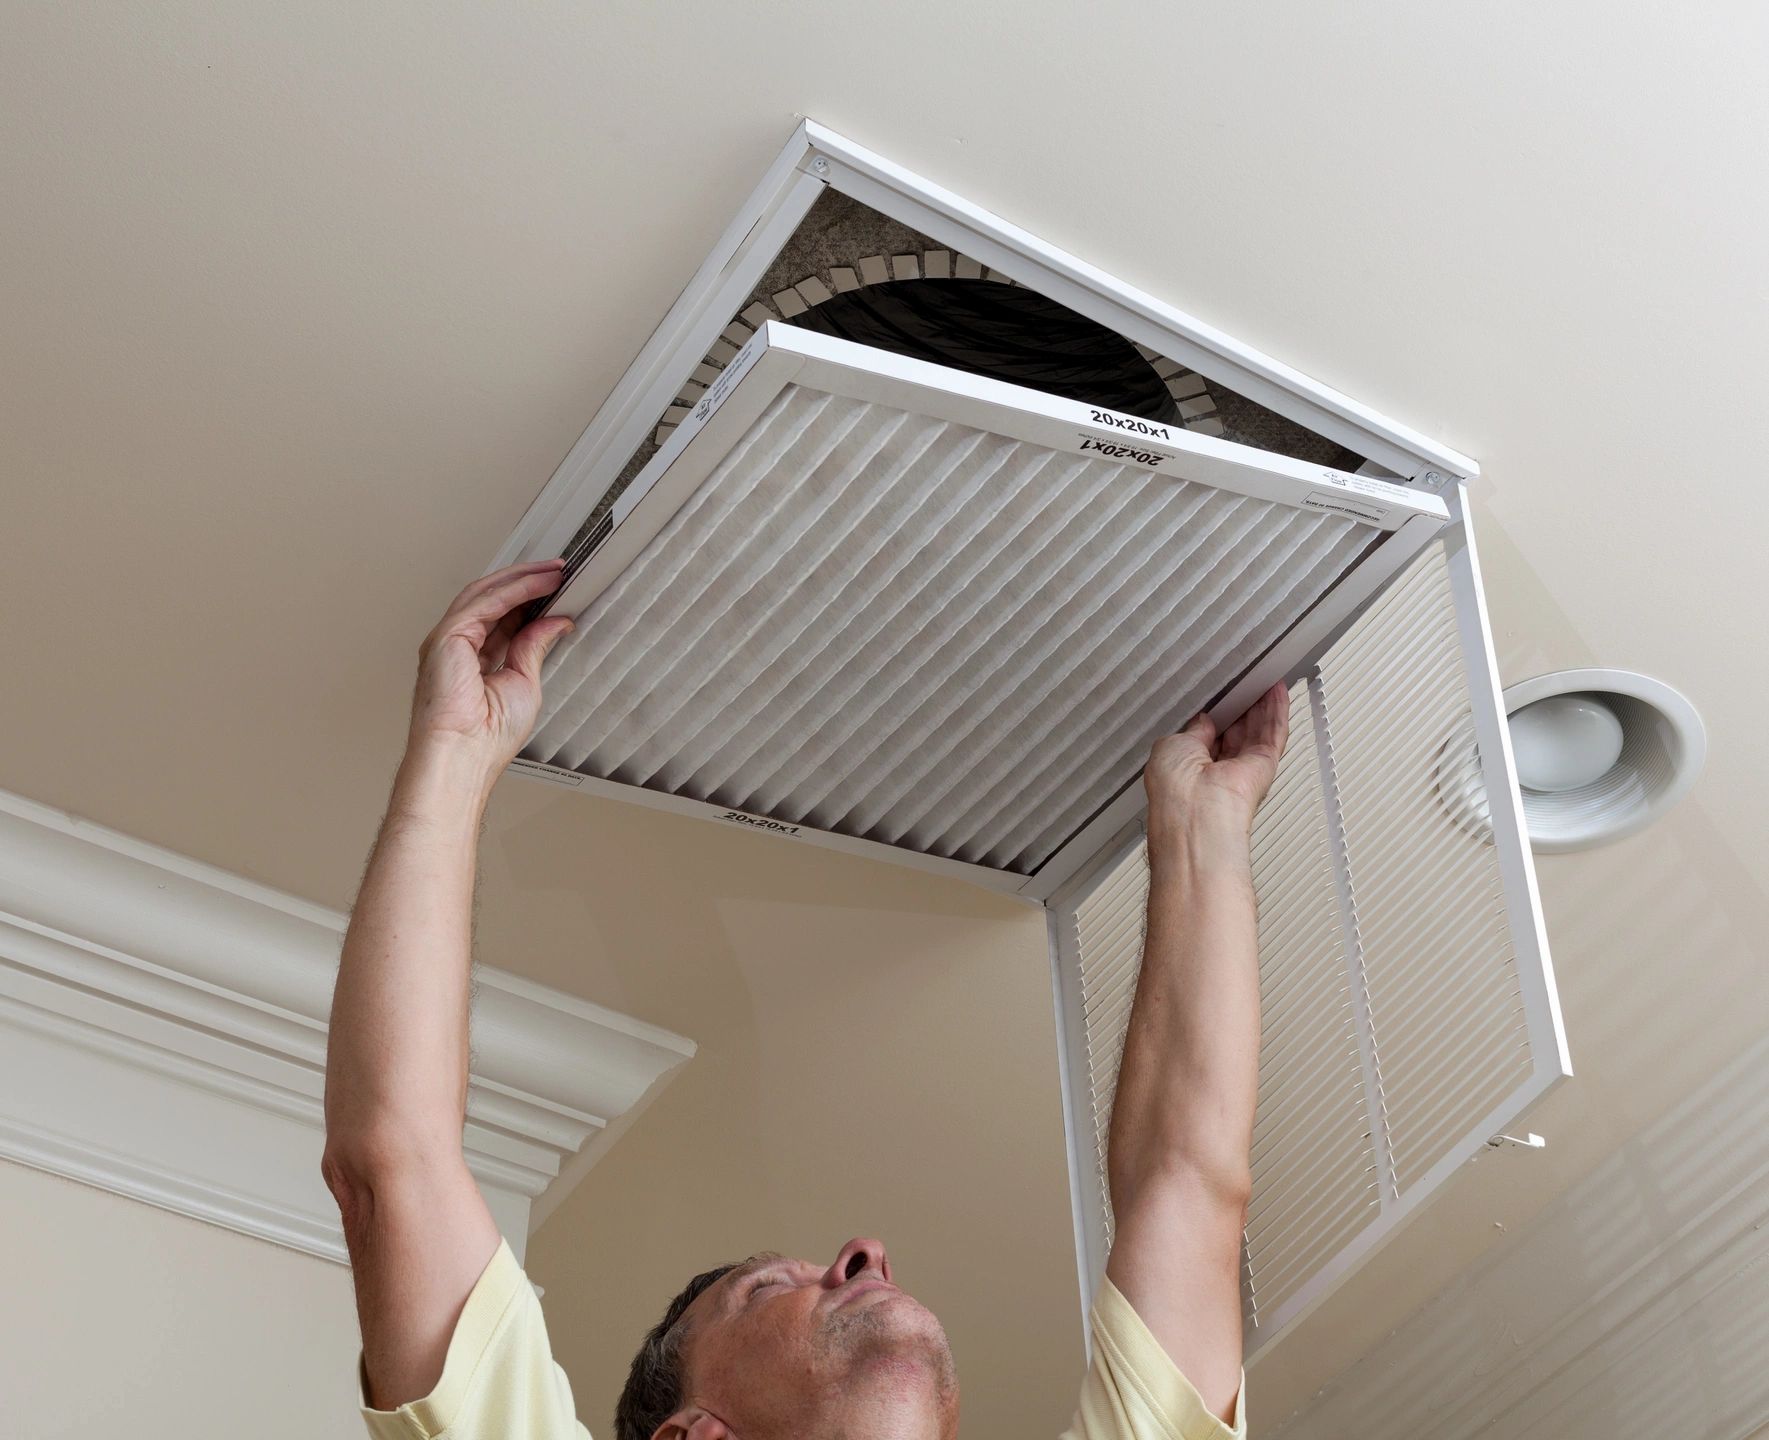 Air conditioning company 11234, air conditioning company, air conditioning installer #aircondition